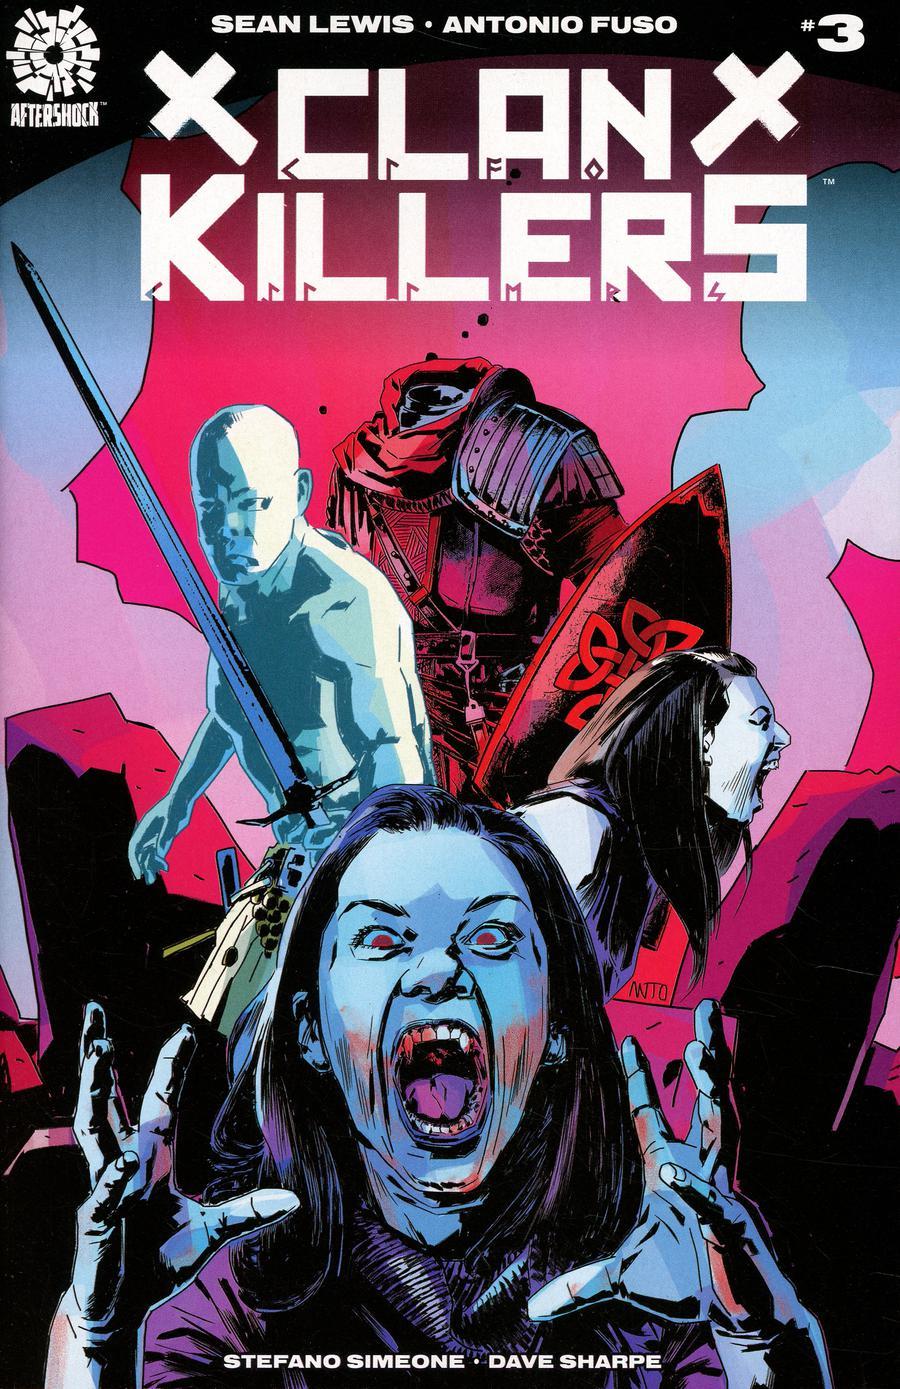 Clankillers Vol. 1 #3